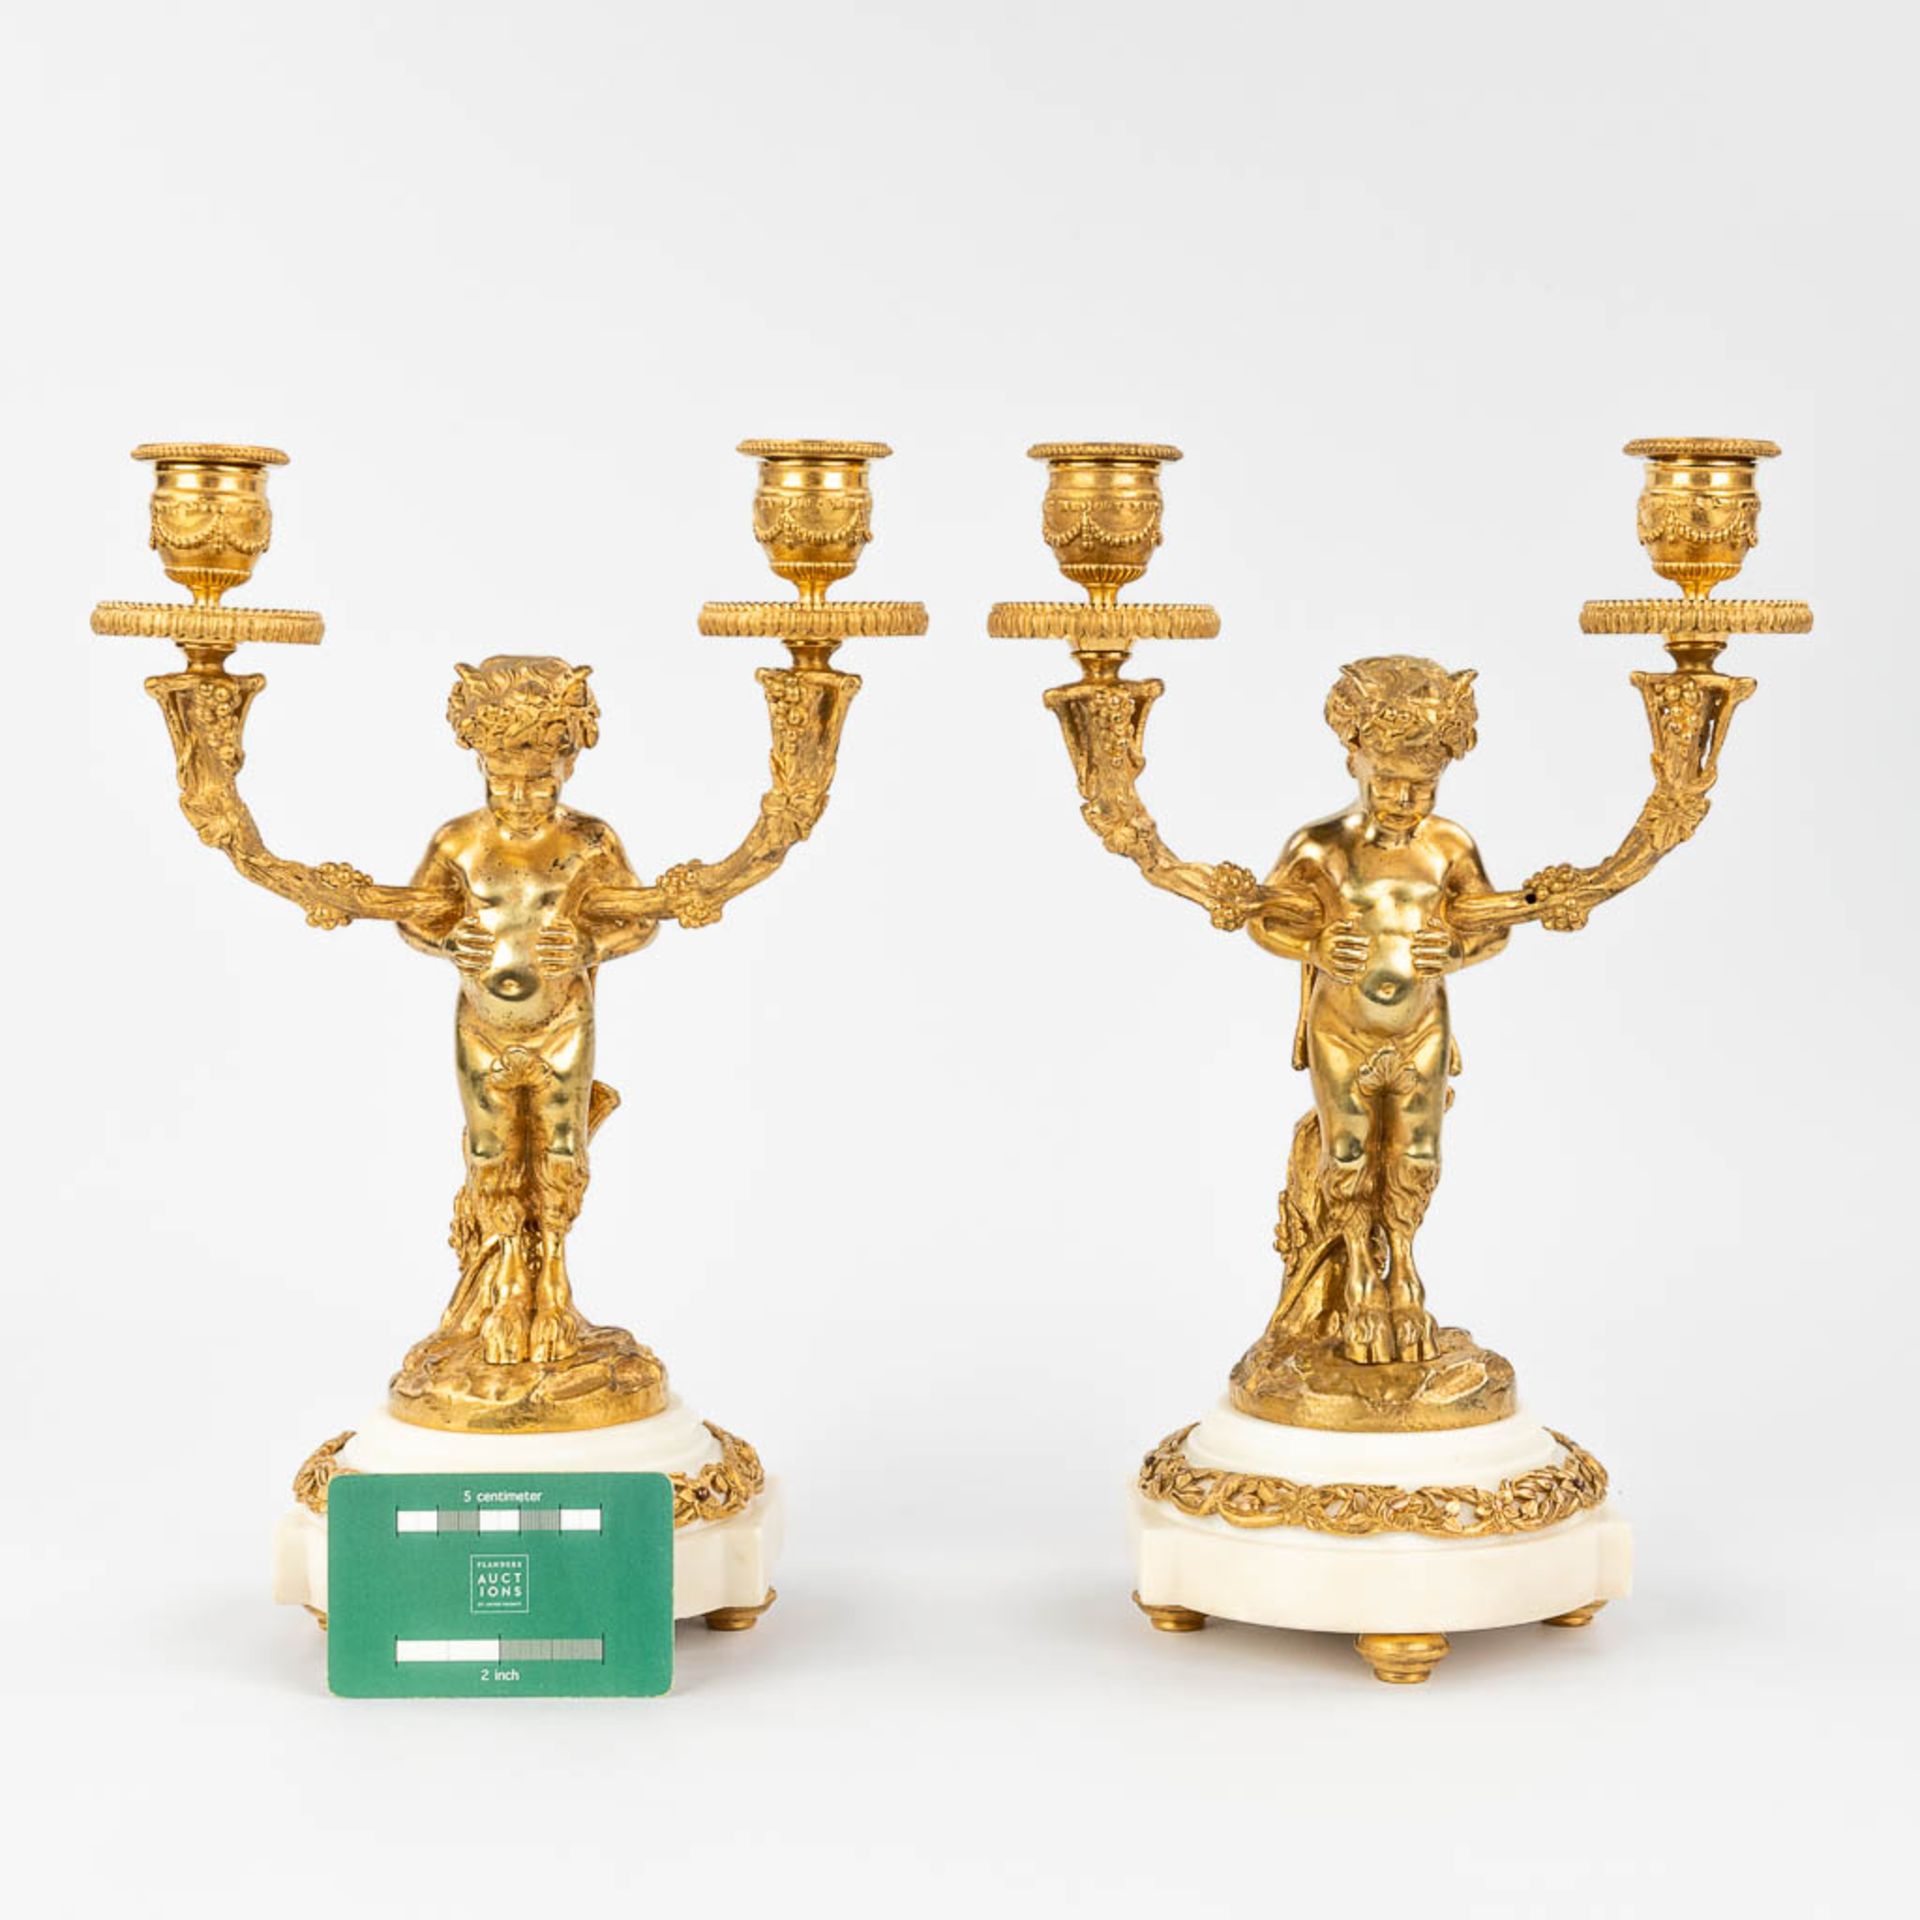 A pair of candelabra with Satyr figurines, made of gold-plated bronze. (13 x 21 x 30,5cm) - Bild 2 aus 13